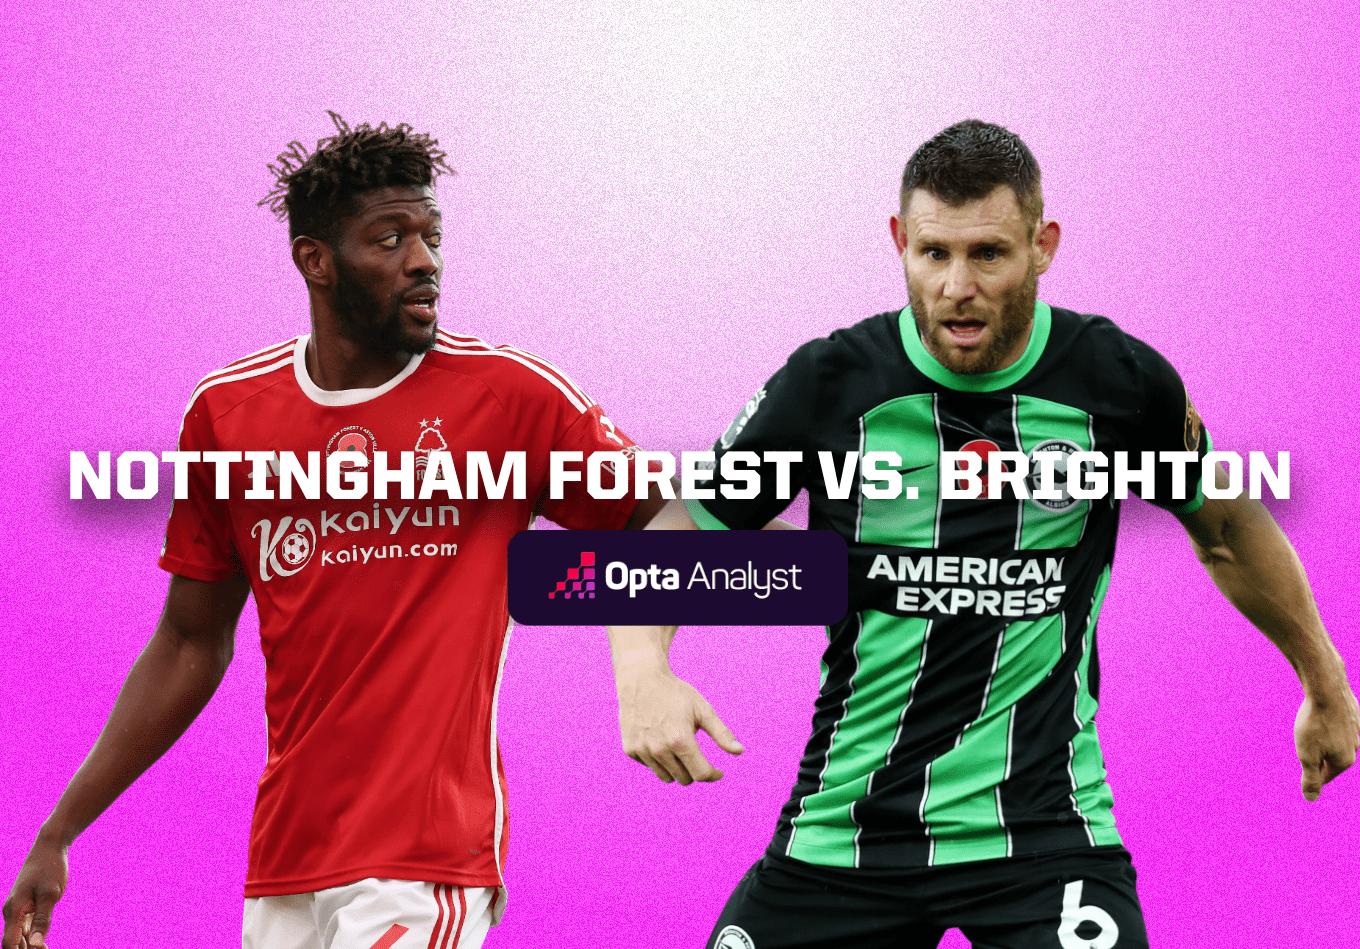 Nottingham Forest vs Brighton: Prediction and Preview